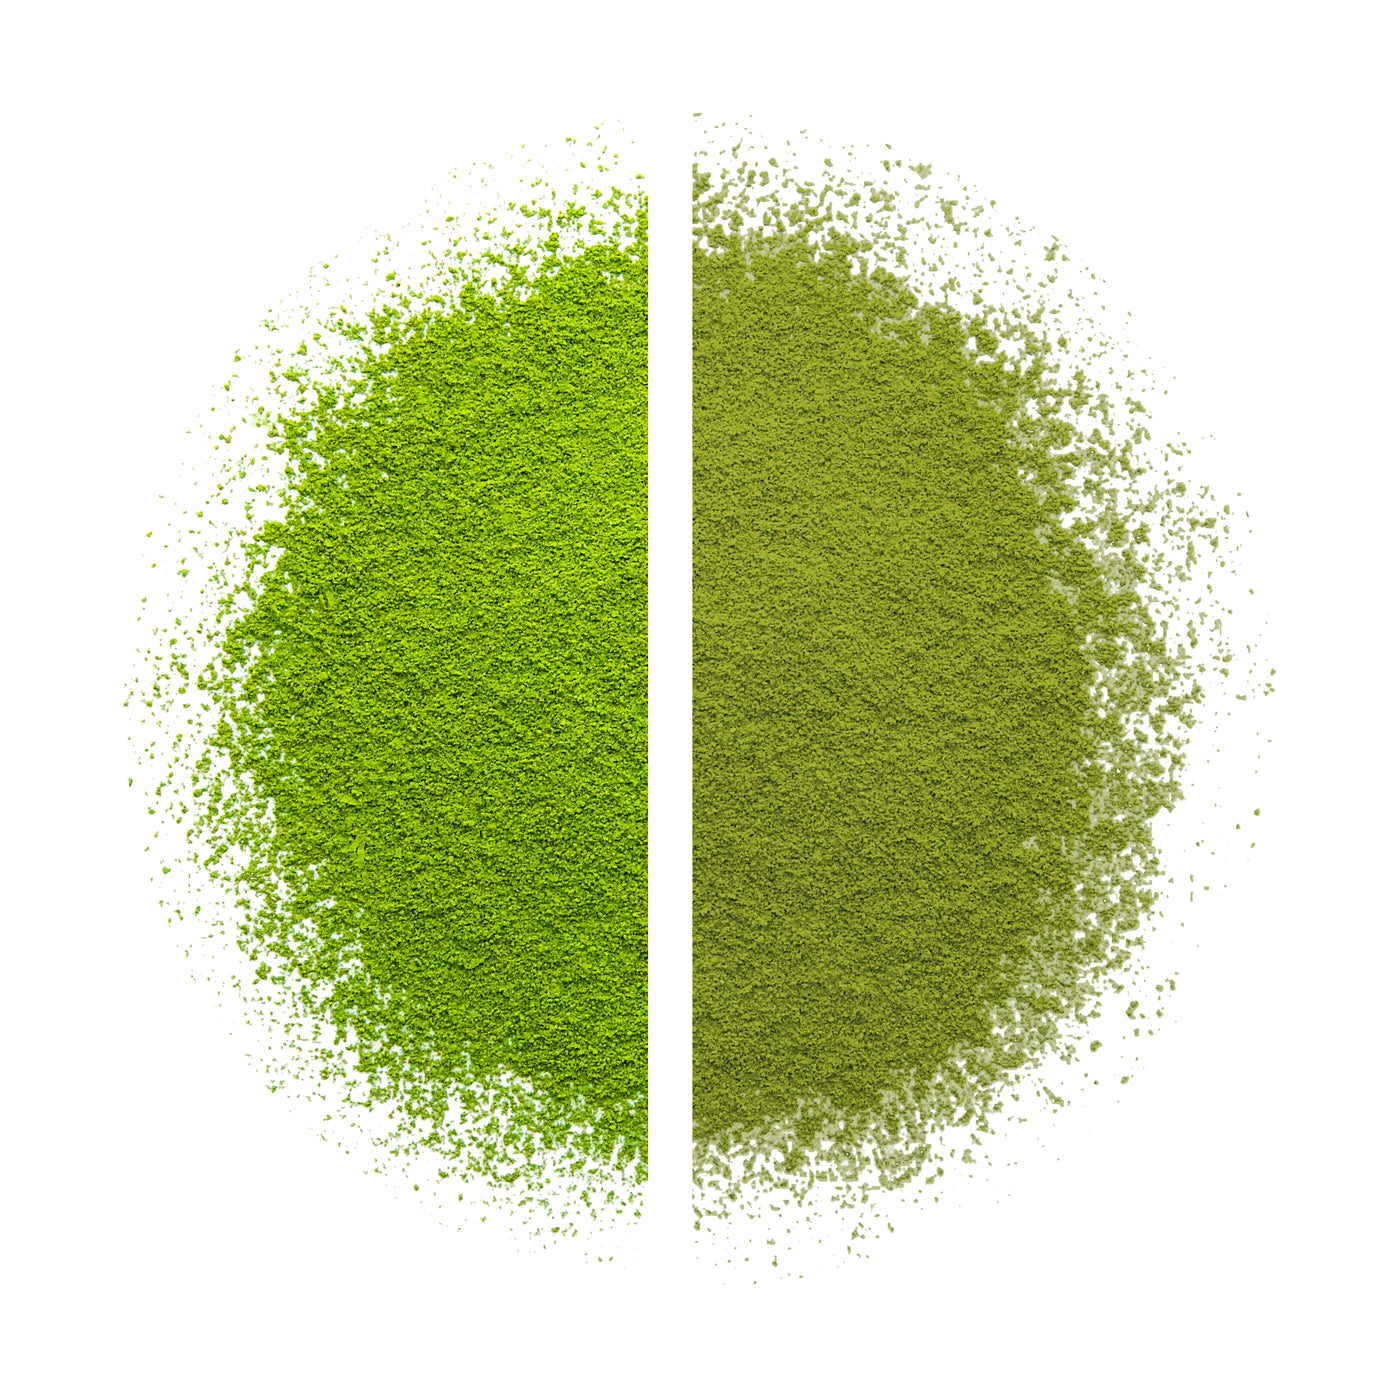 Differences Between Japanese Vs Chinese Grown Matcha – And Why Japanese Matcha is Superior